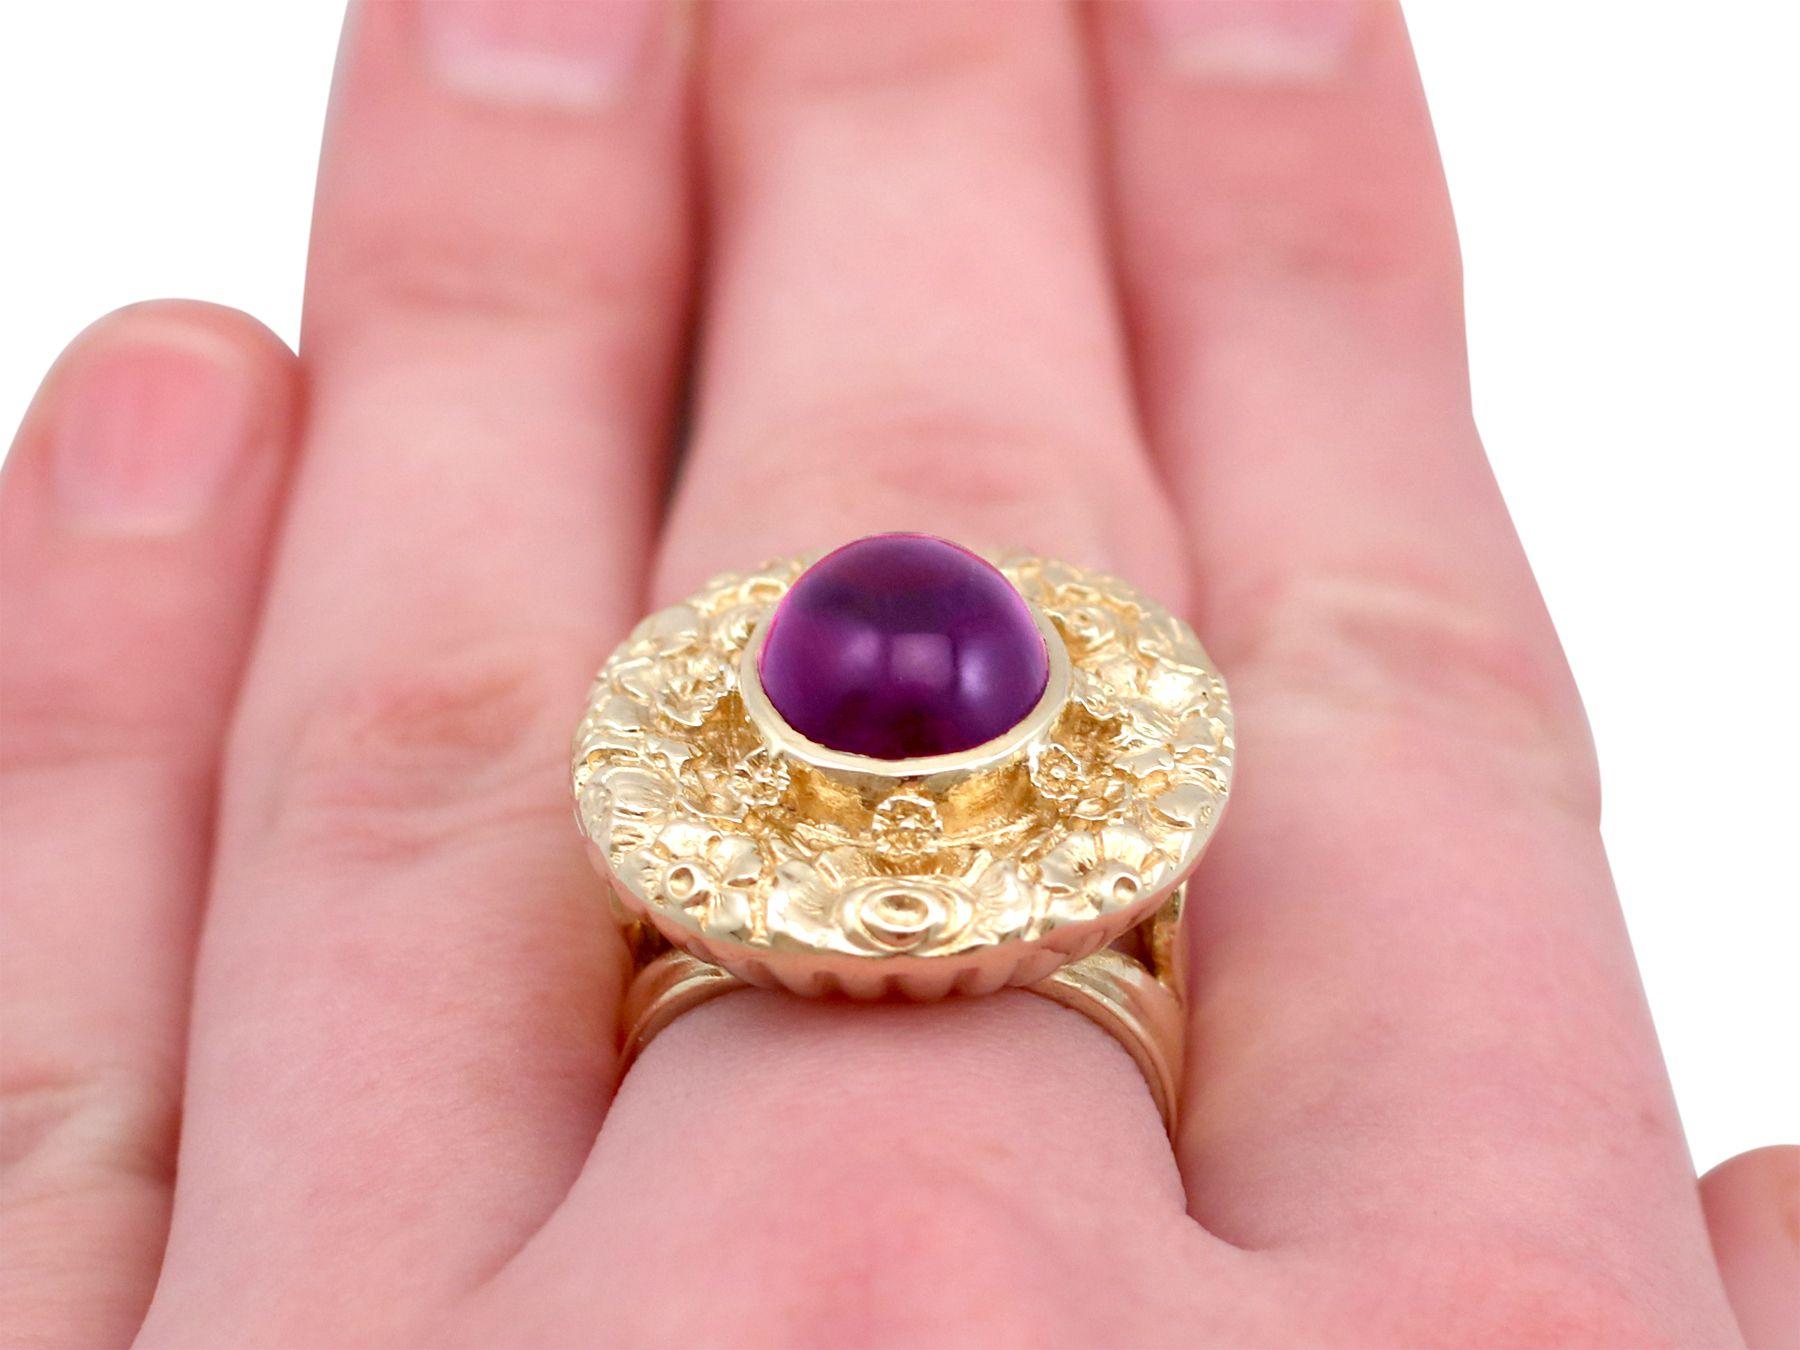 Vintage 1970s 3.77 Carat Amethyst and Yellow Gold Cocktail Ring For Sale 2